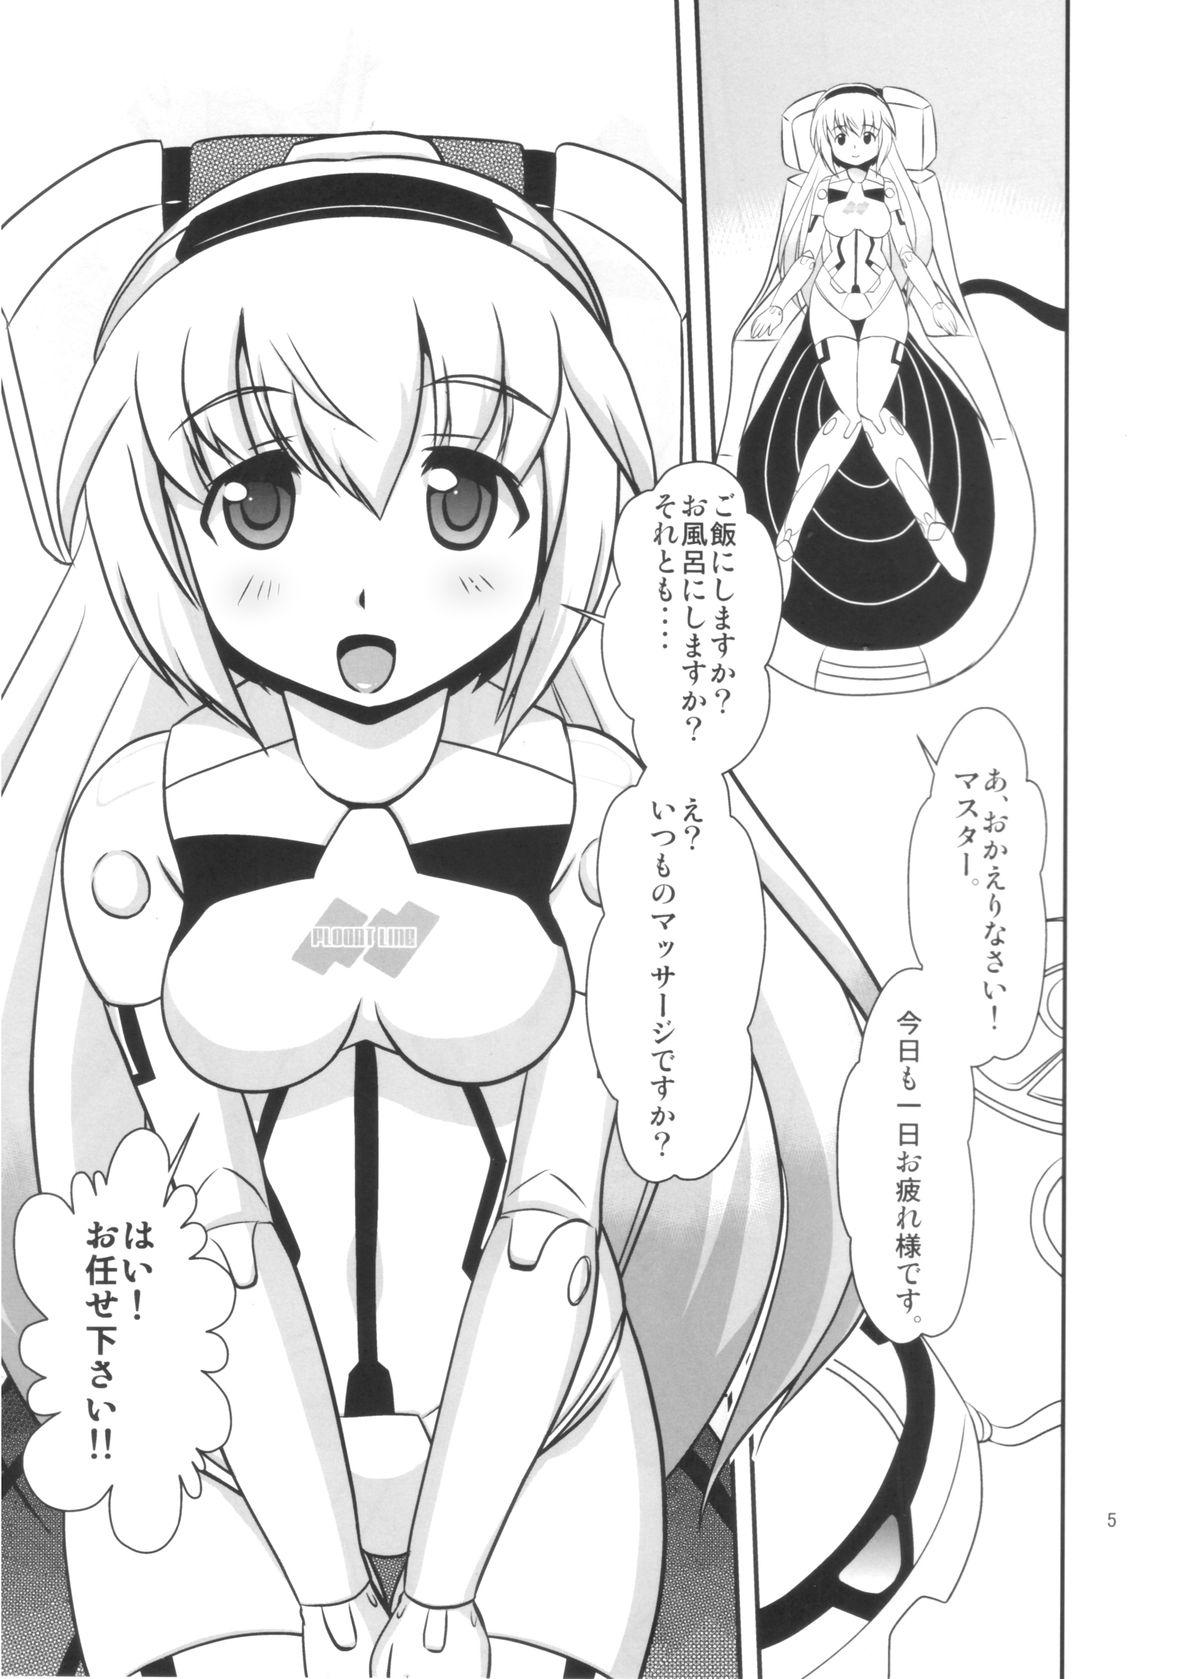 Longhair Little lovers - Busou shinki Cum In Mouth - Page 4